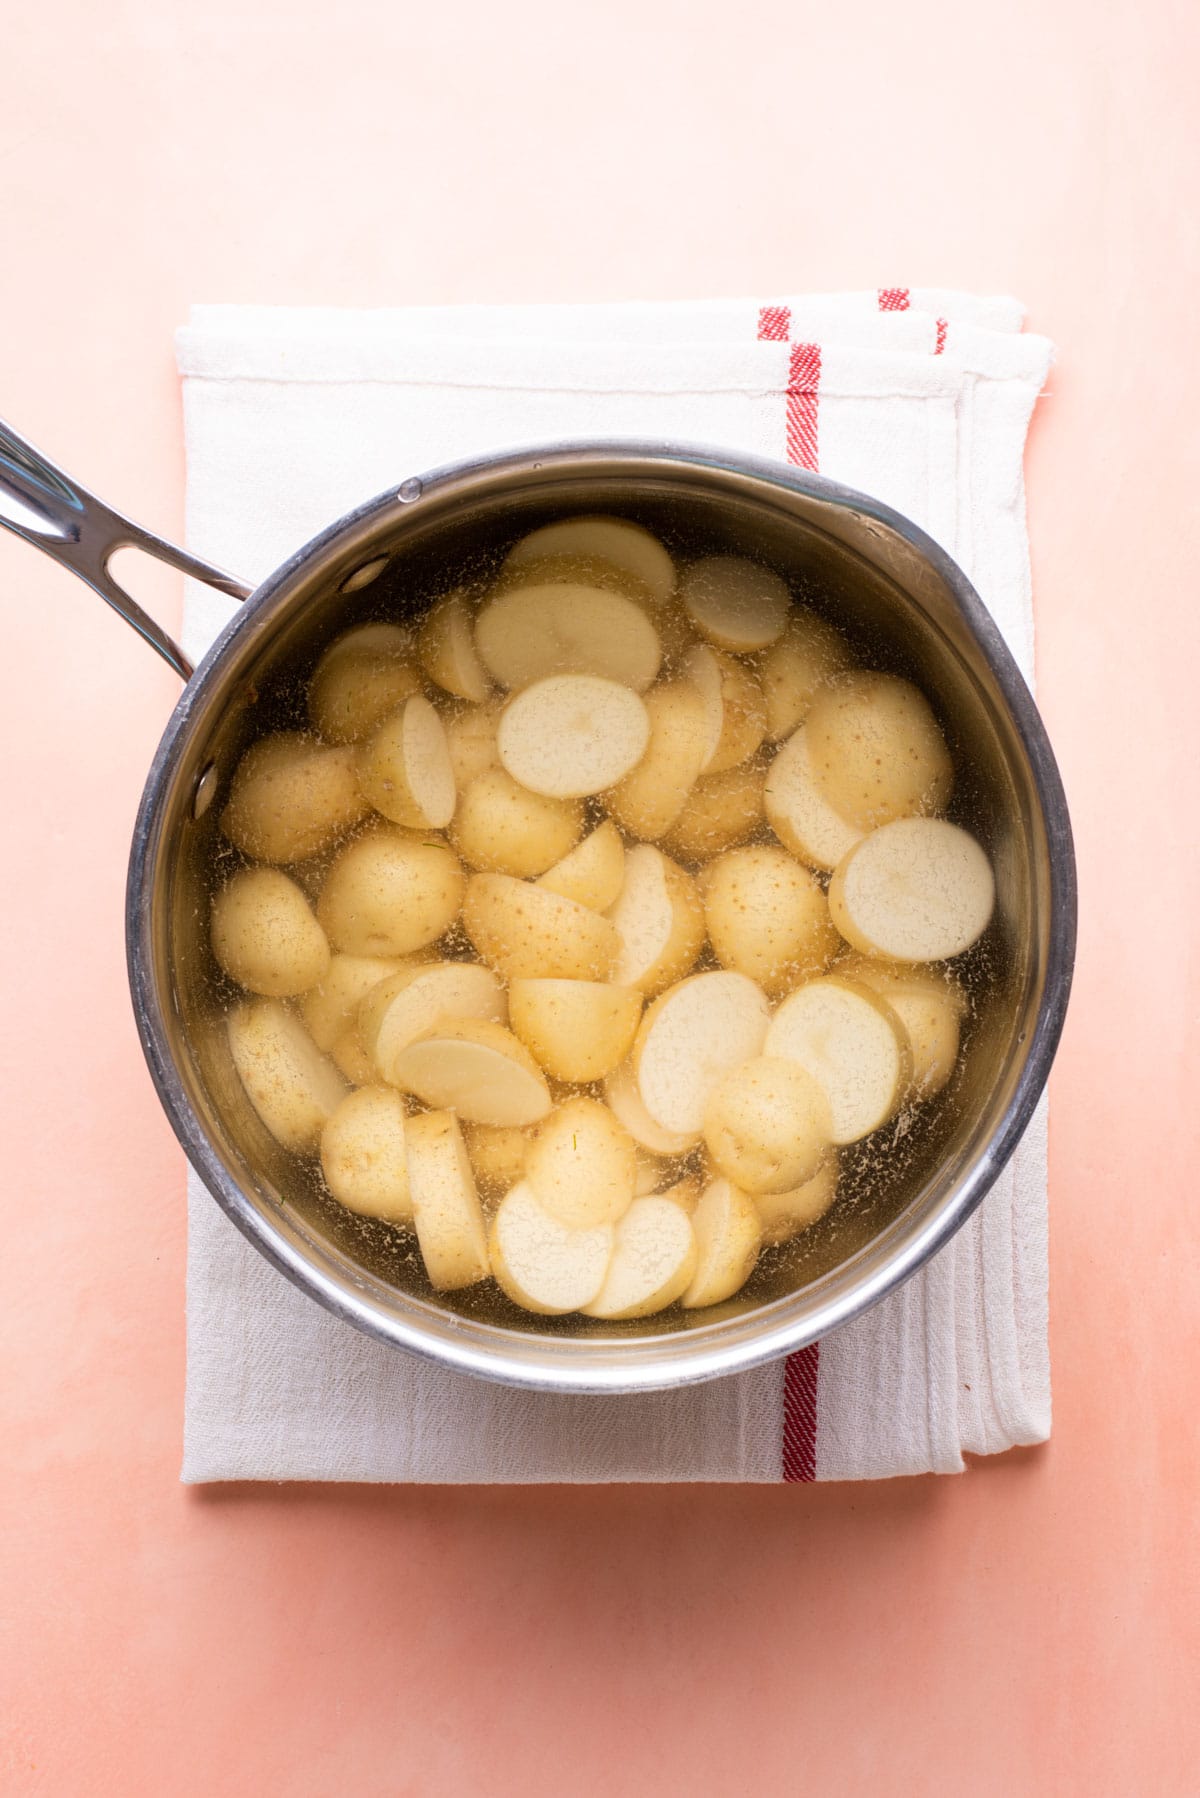 Baby potatoes in a pot of water, ready to be boiled.